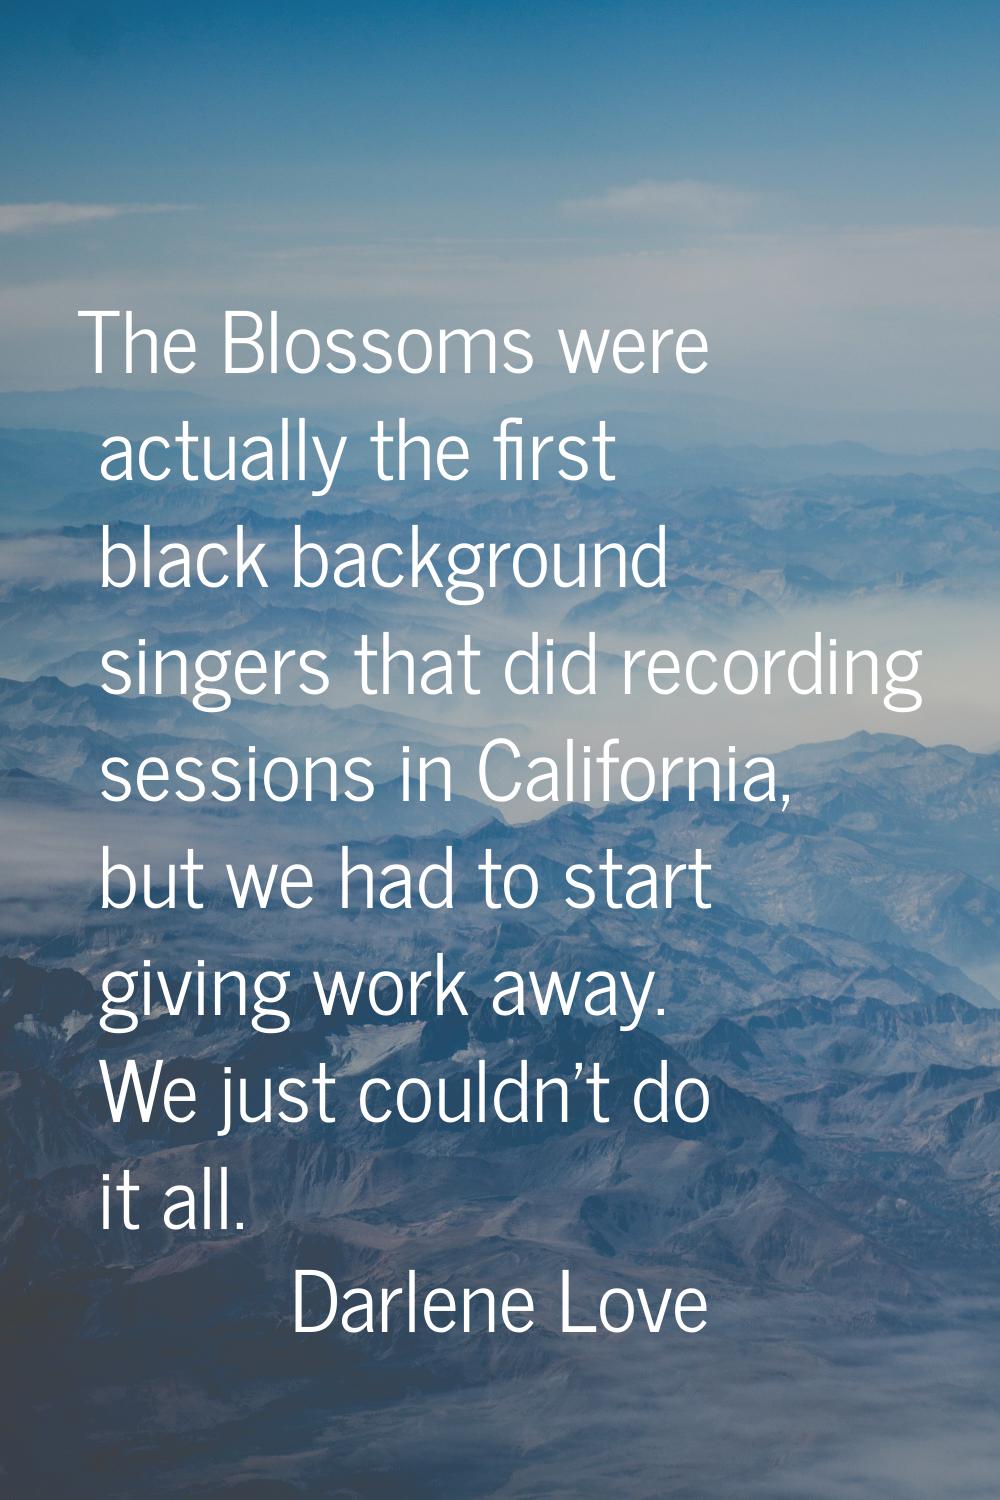 The Blossoms were actually the first black background singers that did recording sessions in Califo